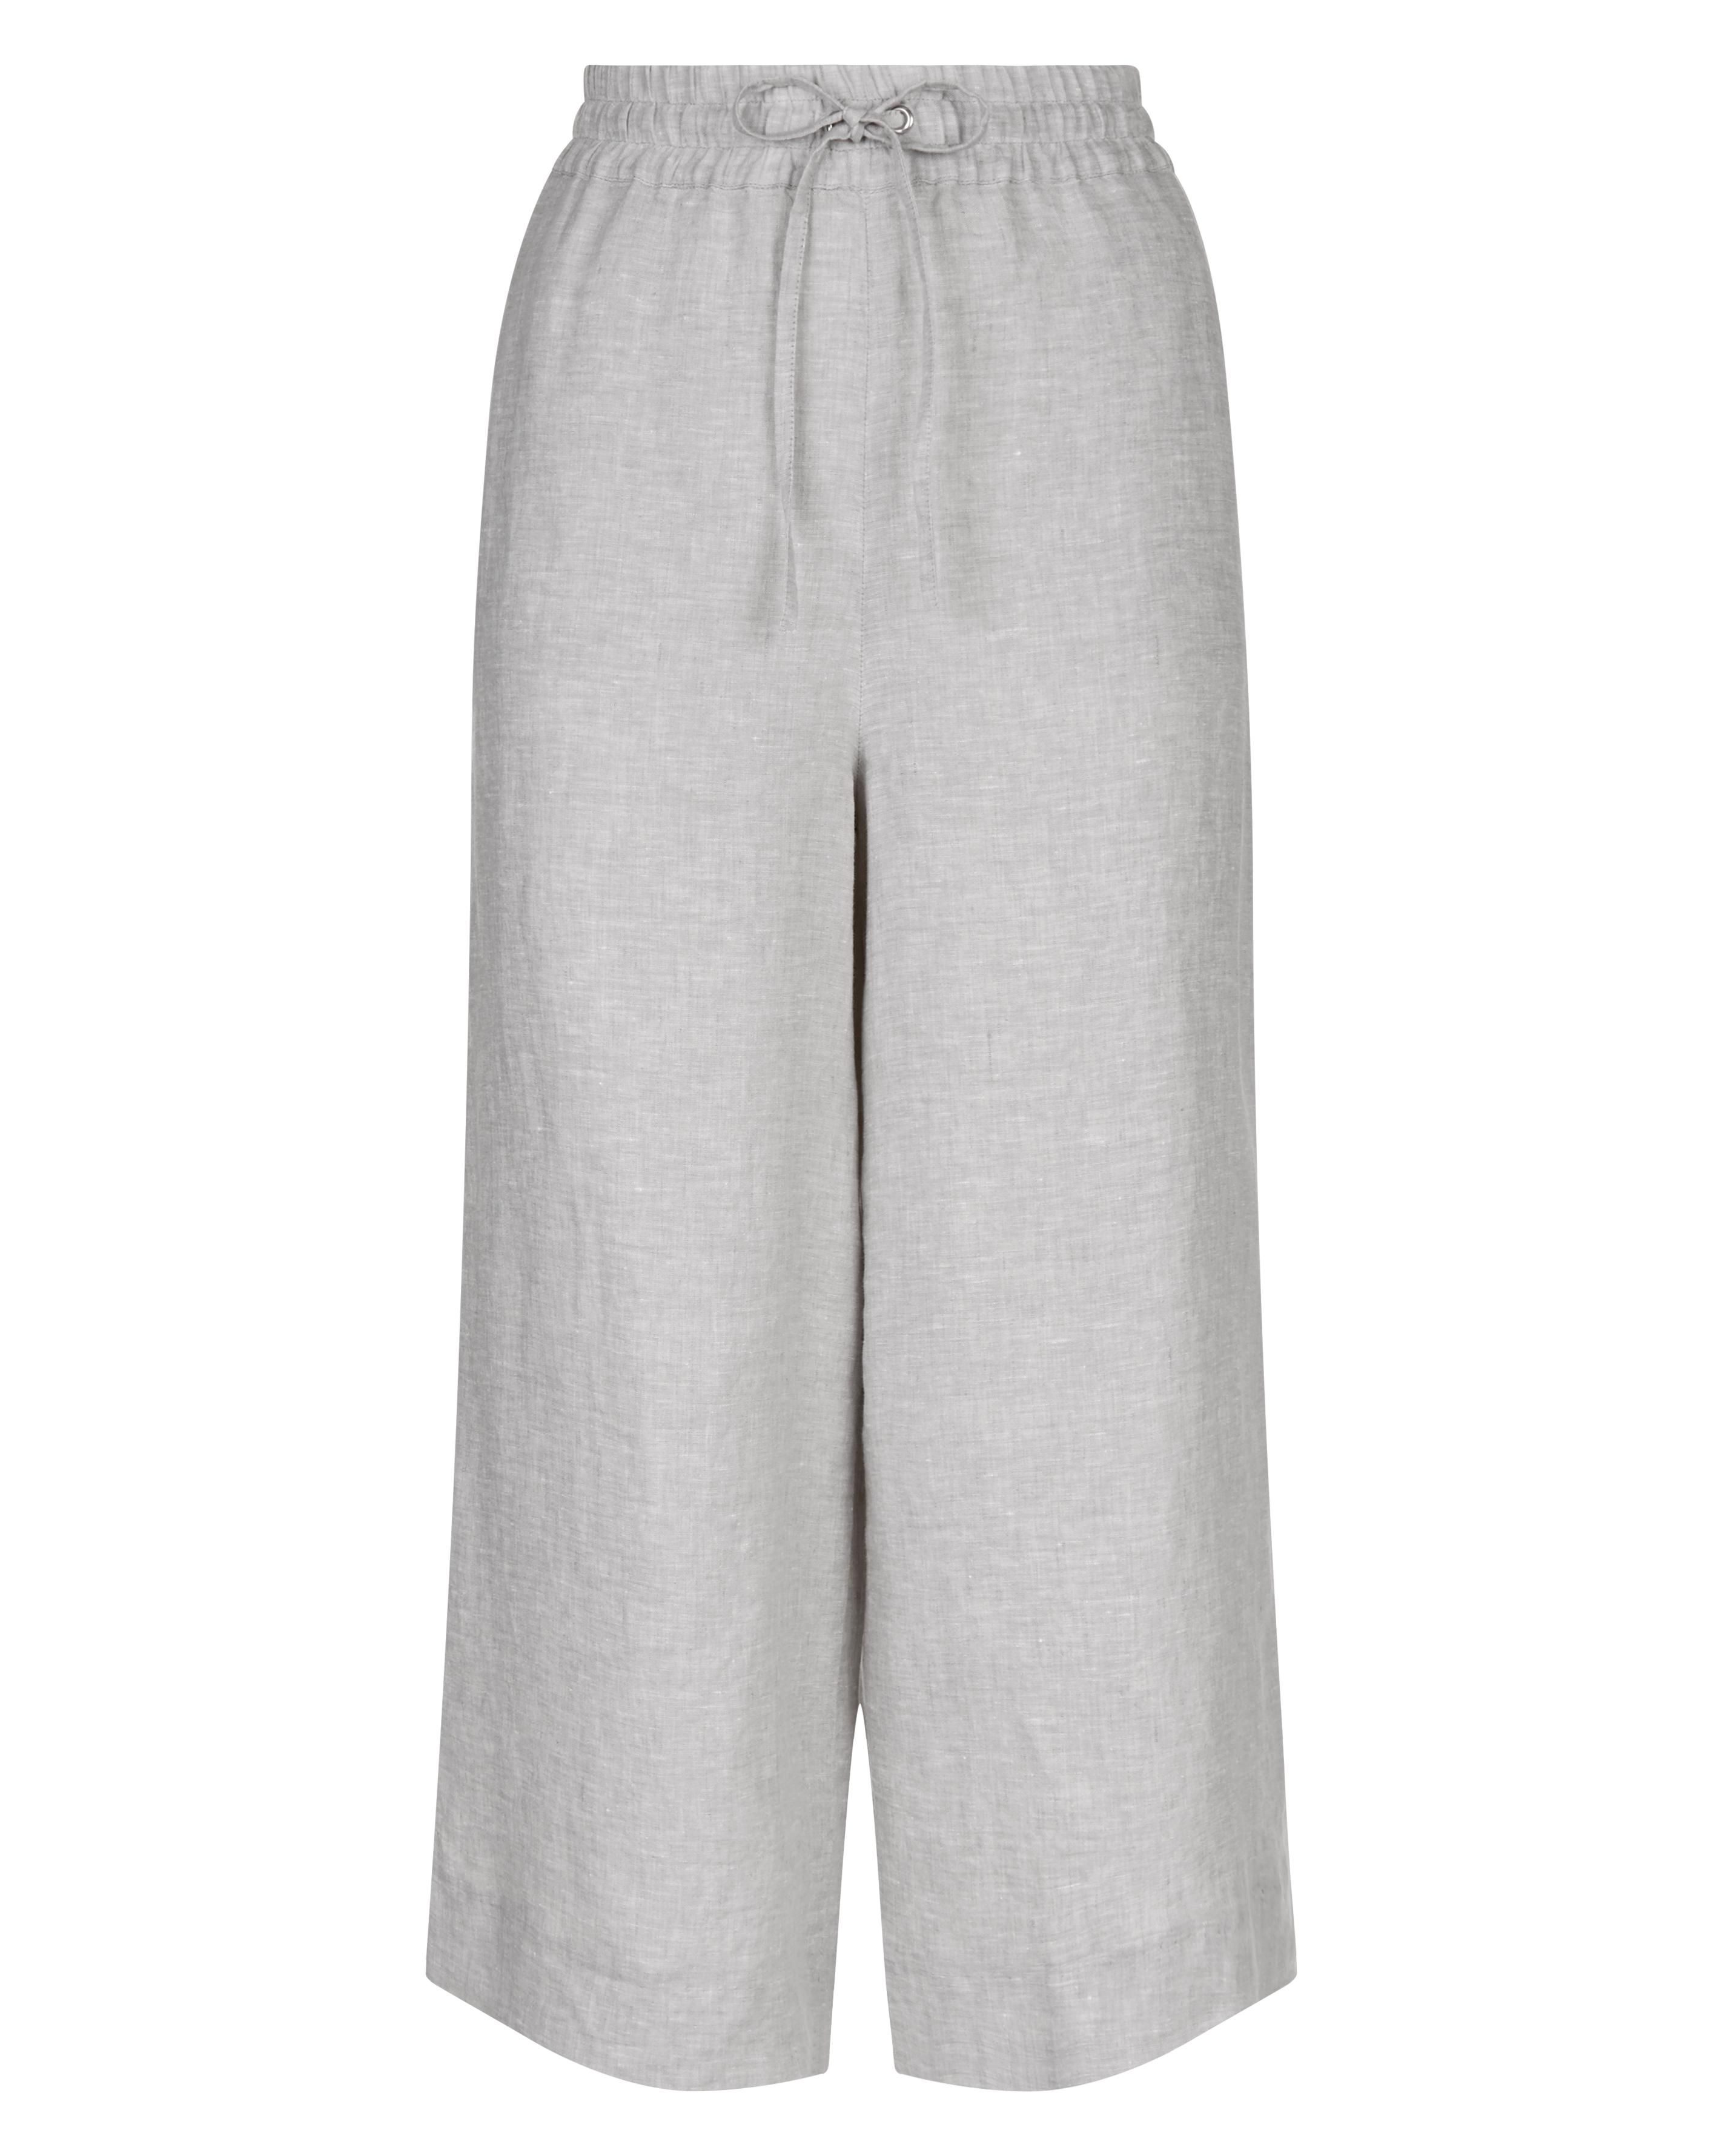 Lyst - Jaeger Linen Wide Cropped Trousers in Gray